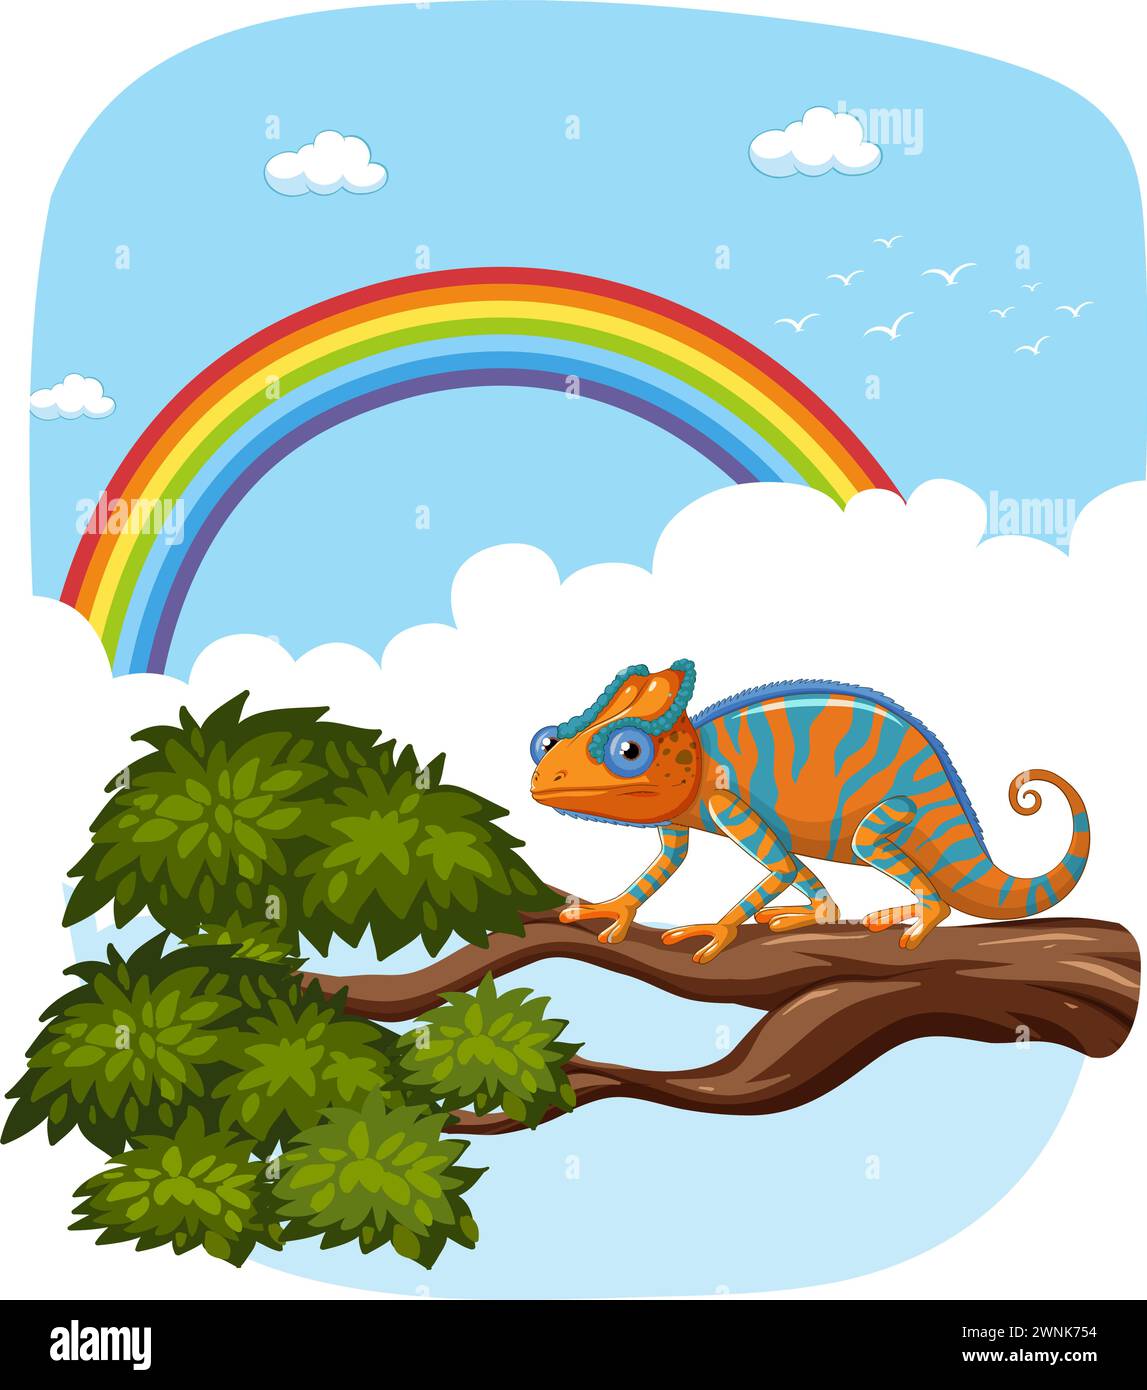 Vector illustration of a chameleon with a vibrant rainbow. Stock Vector